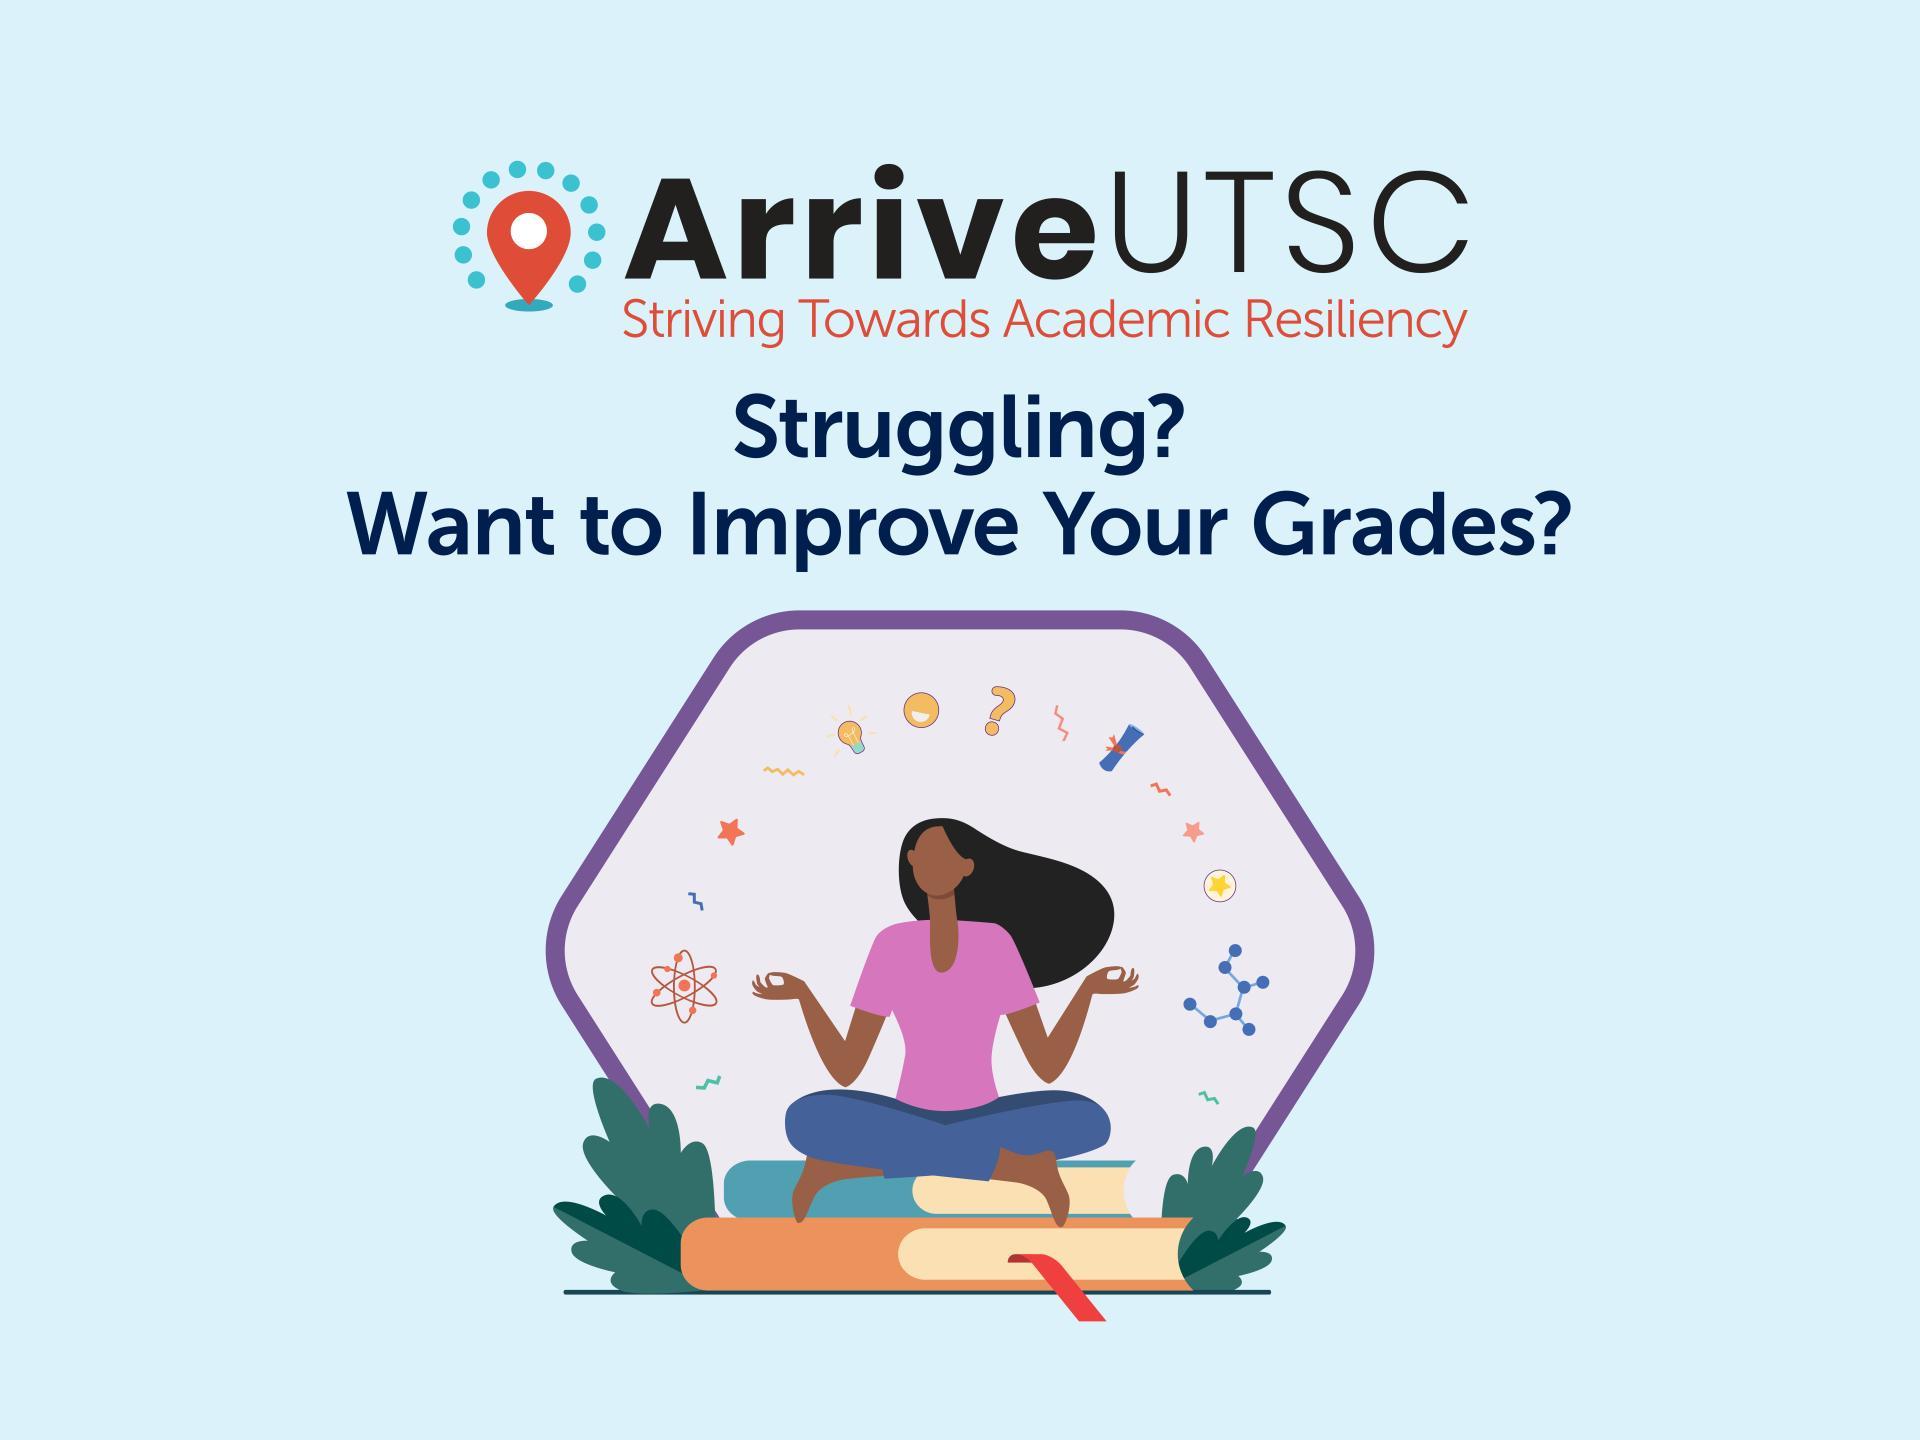 ArriveUTSC Striving Towards Academic Resiliency. Struggling? Want to improve your grades?